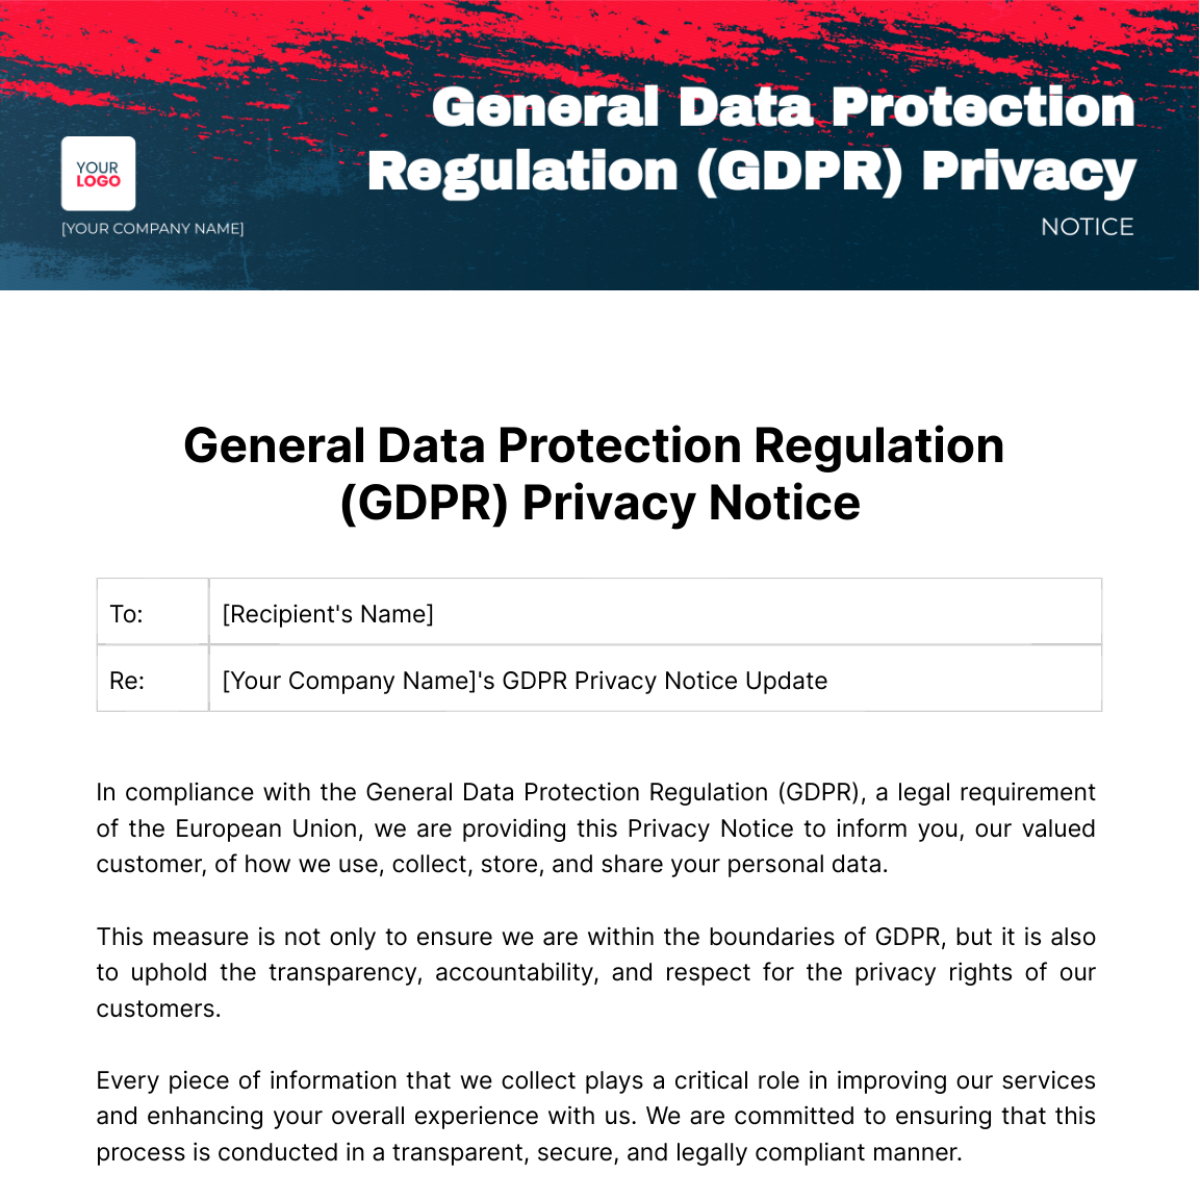 General Data Protection Regulation (GDPR) Privacy Notice Template